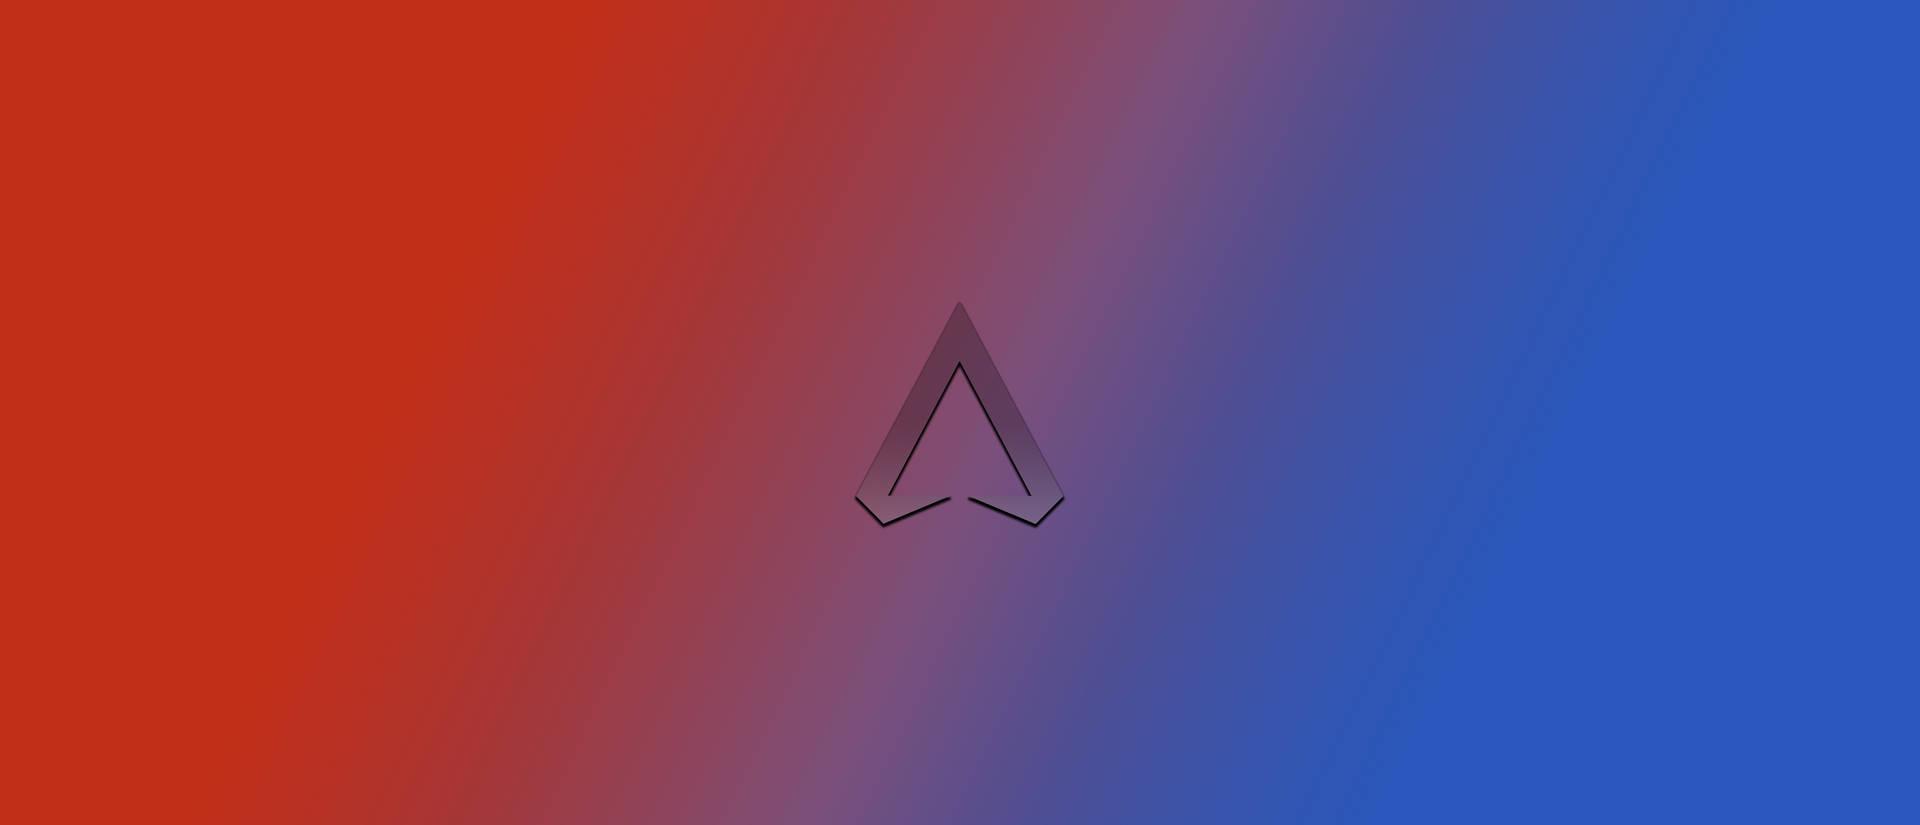 Apex Legends Iphone Red And Blue Logo Wallpaper